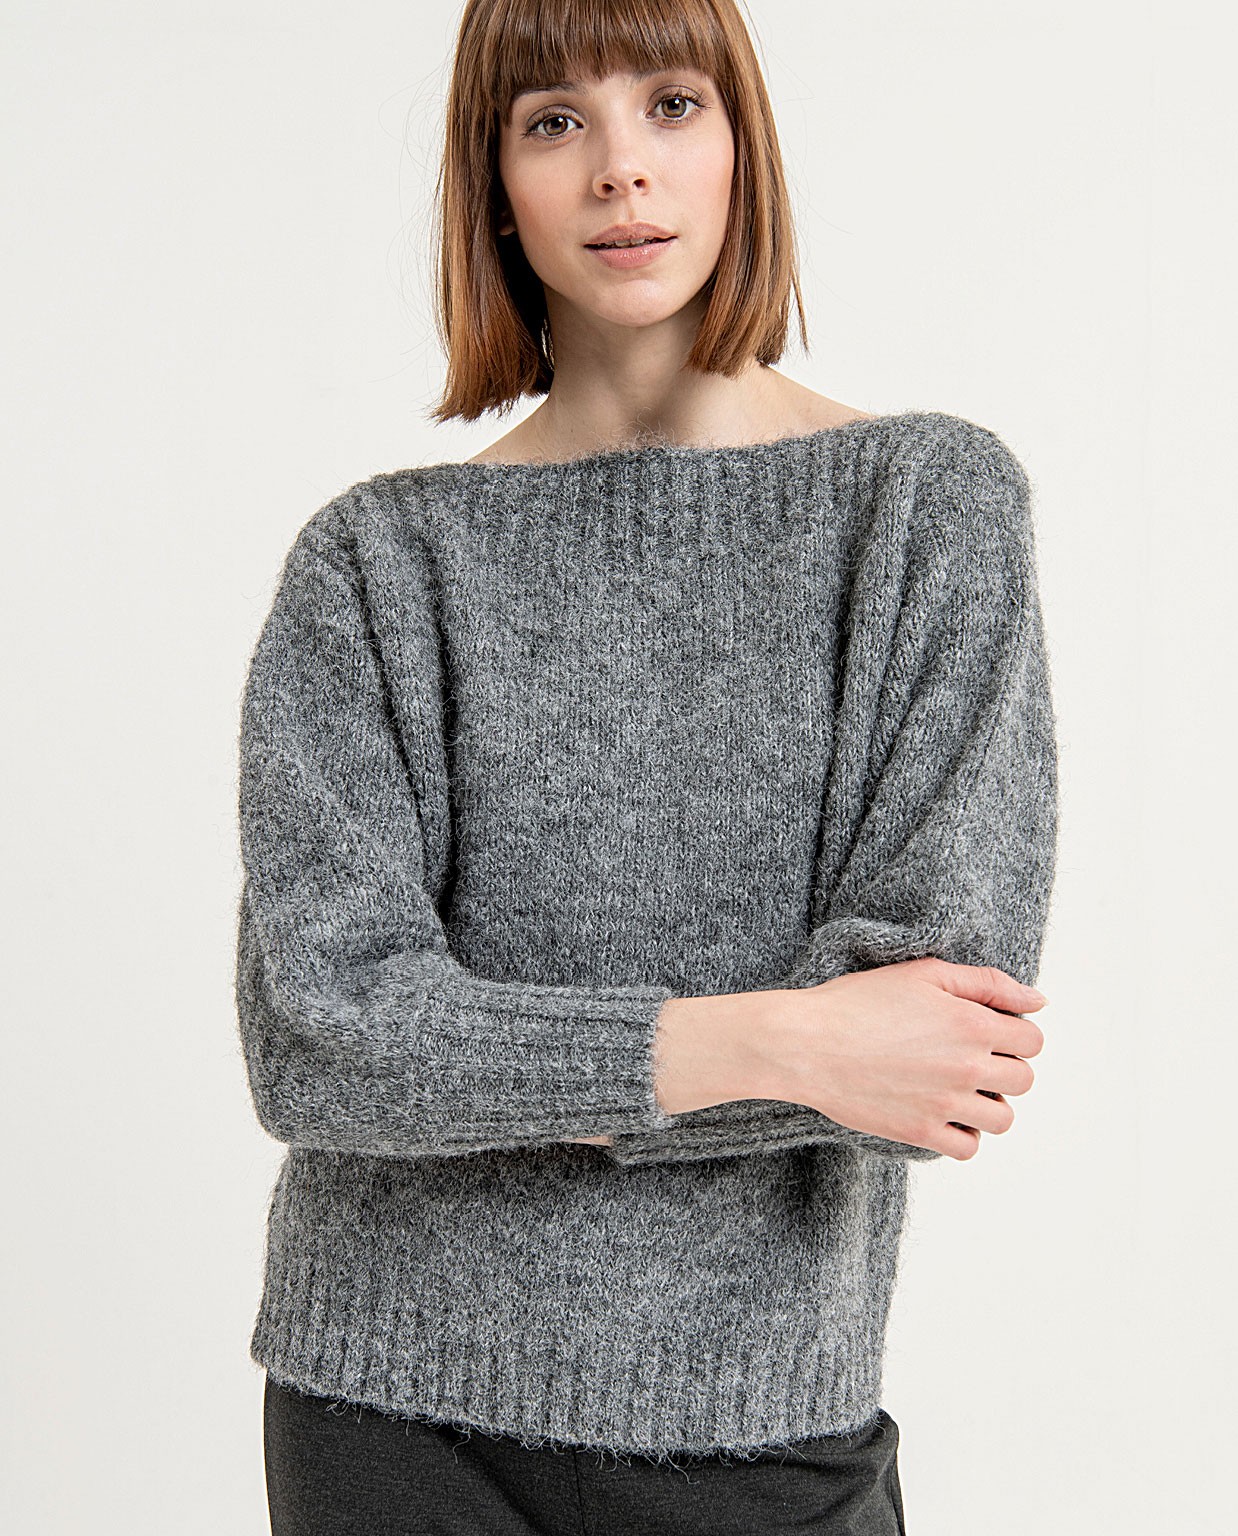 Knitted pullover with boat neckline and wide plain Grey